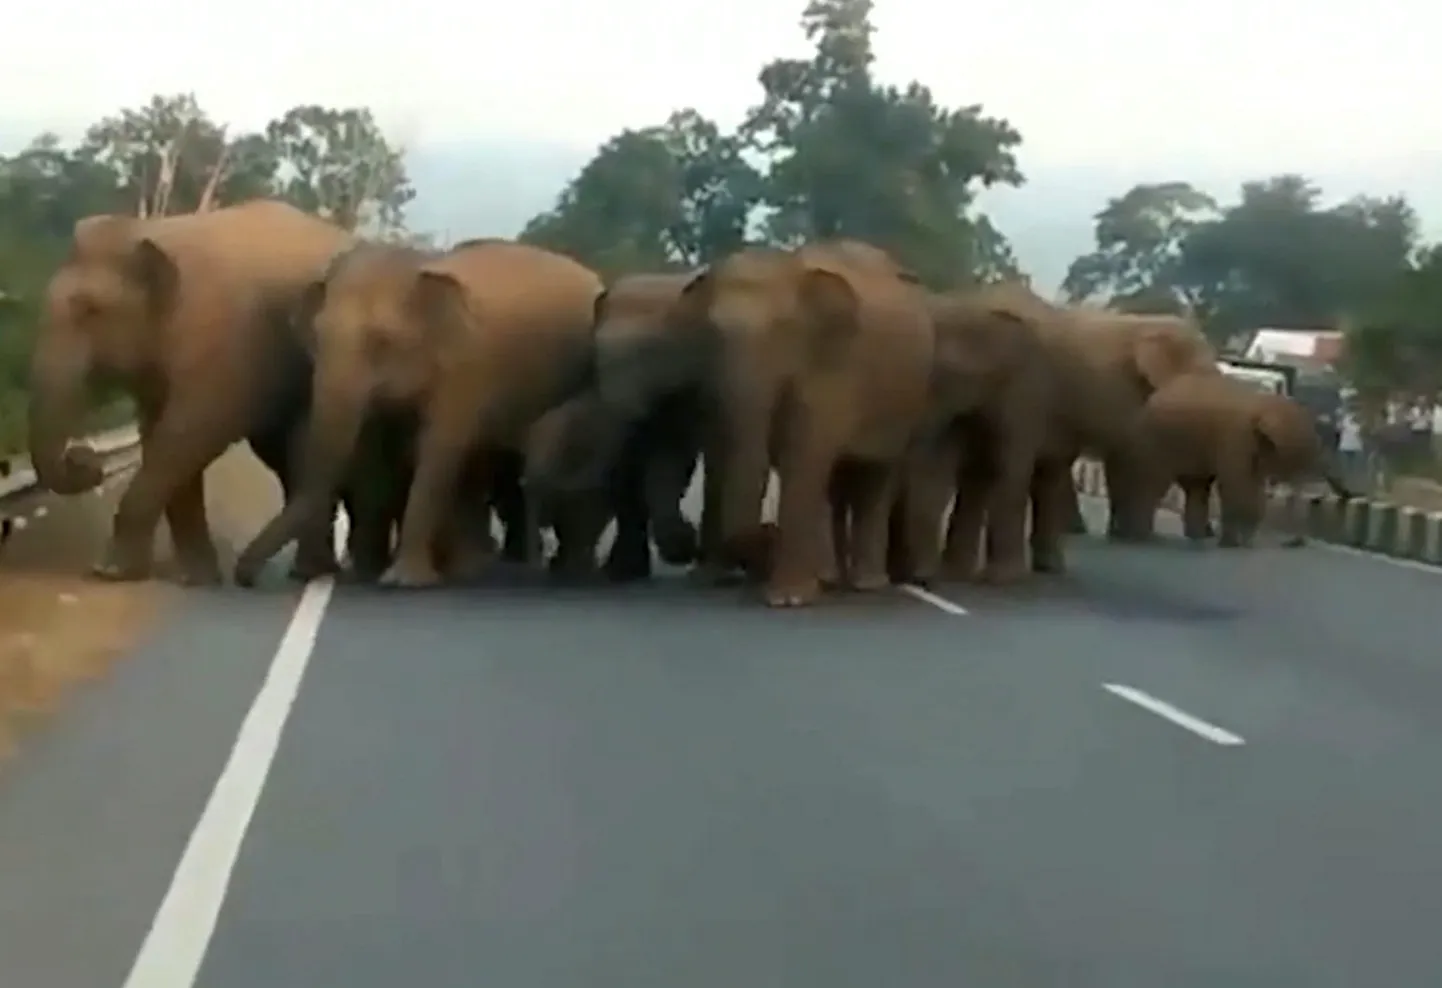 Video grab of the moment motorway traffic was brought to a standstill after a herd of ELEPHANTS crossed the road.See SWNS story SWTRUNK; The family - including a number of baby elephants - wandered on to the highway on its way to the forest. They all collected on the four-lane route after the babies struggled to get over the barricades, leaving baffled drivers with no choice but to wait. The video was taken by motorist Jitendra Tiwari who was travelling on Highway 33 in Ramgarh in Jharkhand state in India on Wednesday.